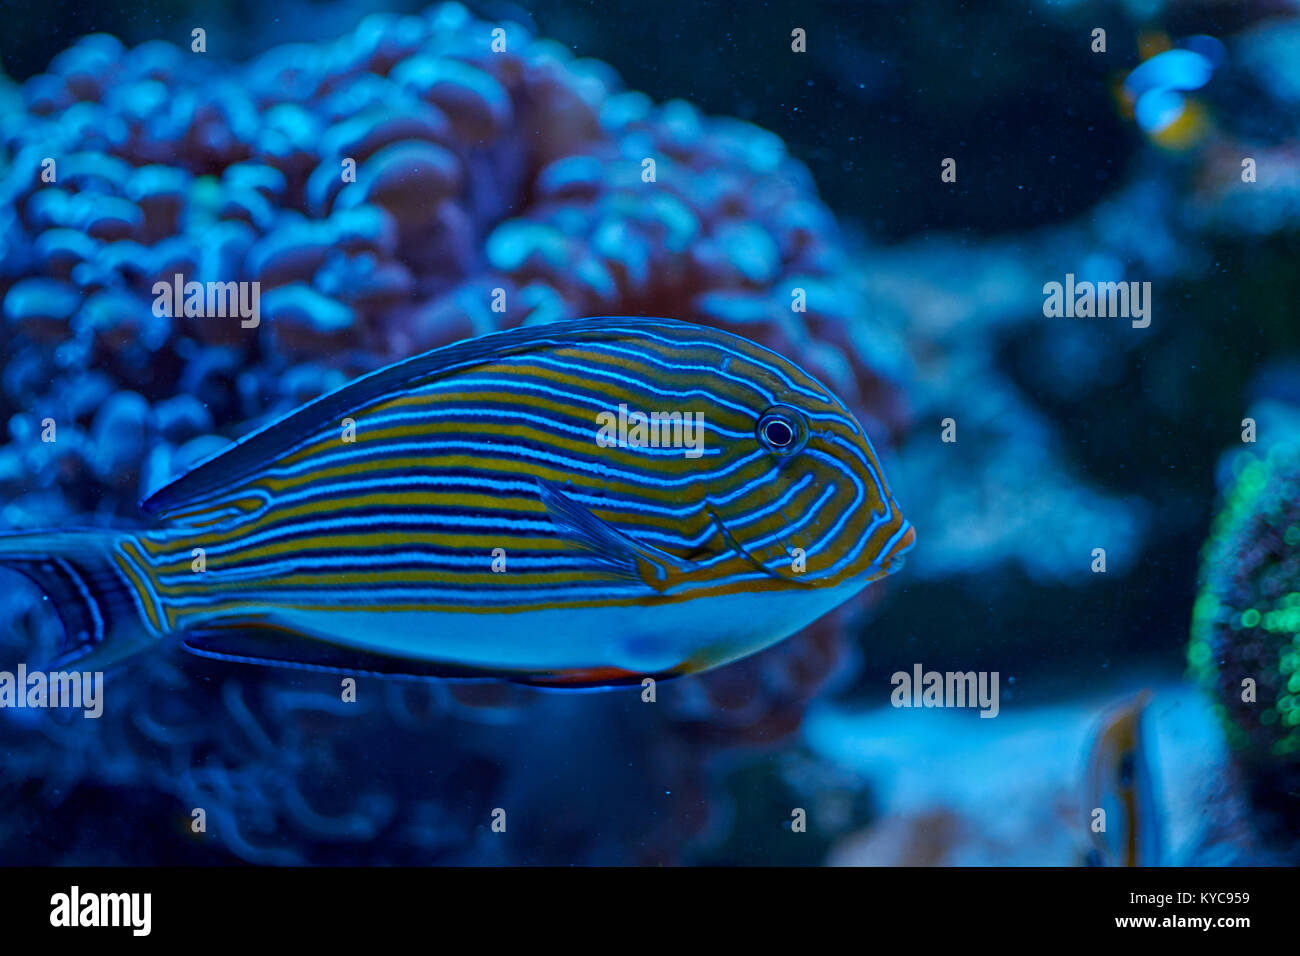 Acanthuridae from surgeonfishes family behind coral in aquarium Stock Photo